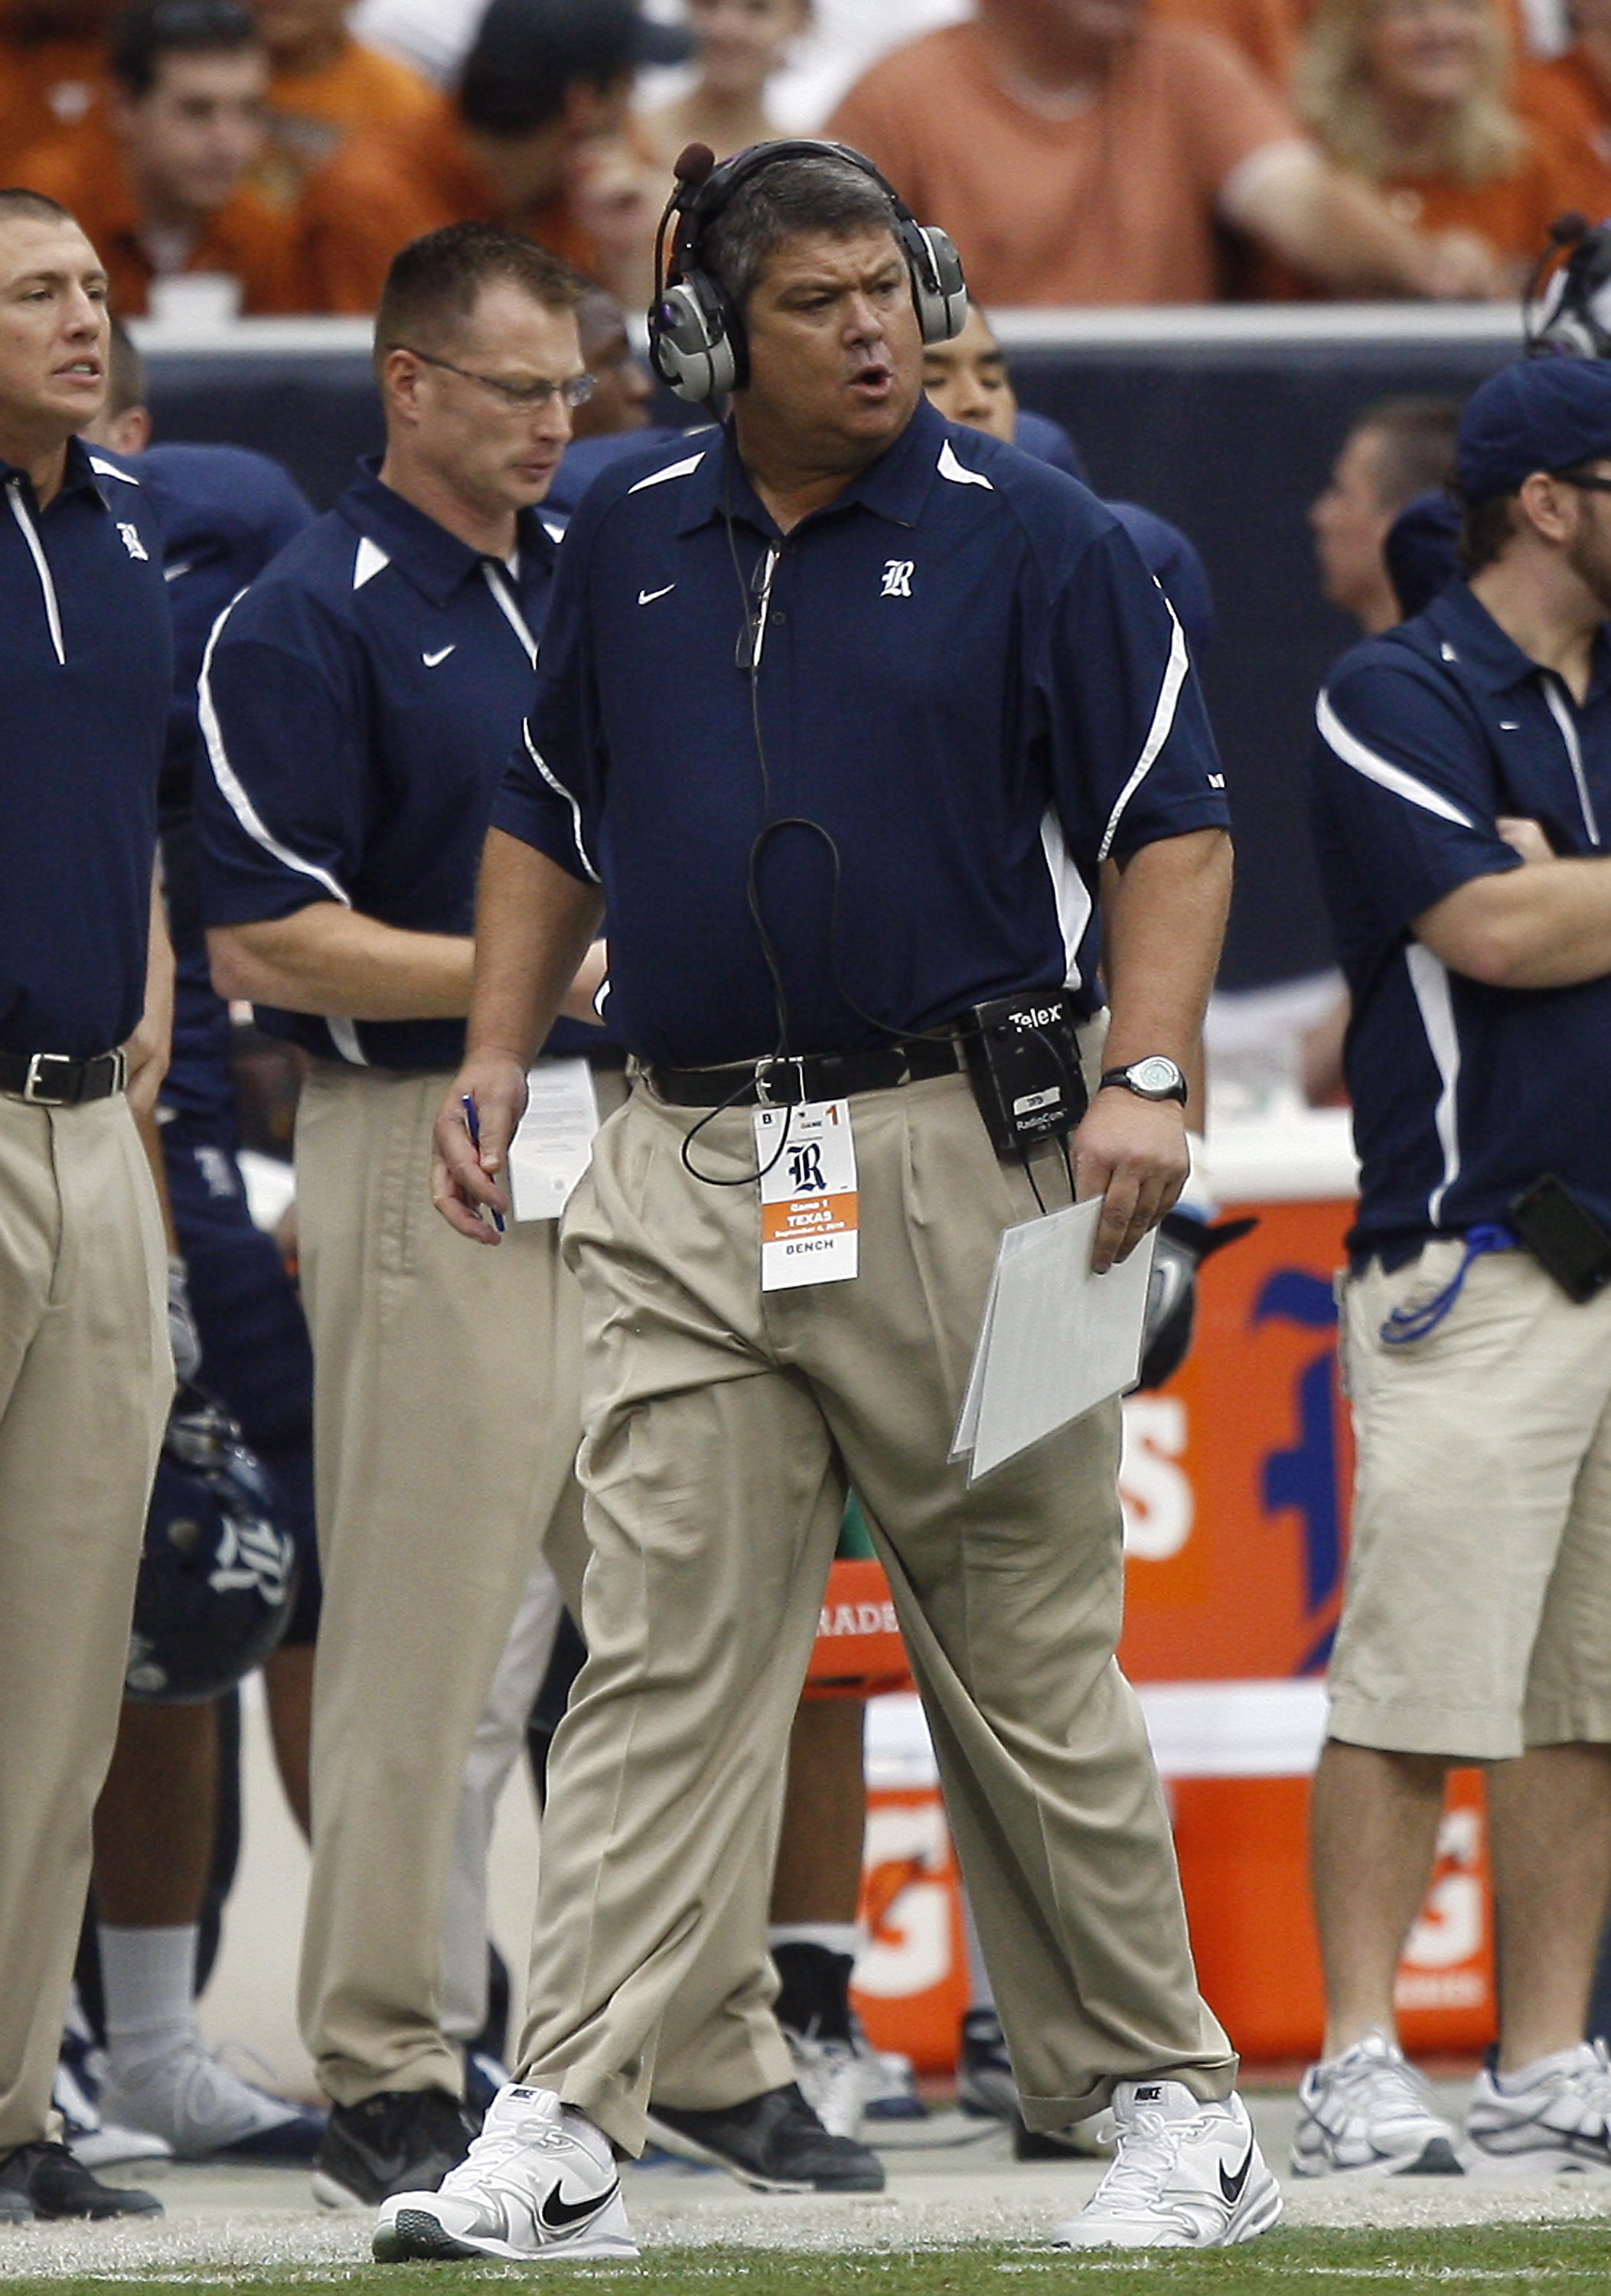 HOUSTON - SEPTEMBER 04:  Head coach David Bailiff of the Rice Owls during game action against the Texas Longhorns at Reliant Stadium on September 4, 2010 in Houston, Texas. Texas won 34-17.  (Photo by Bob Levey/Getty Images)